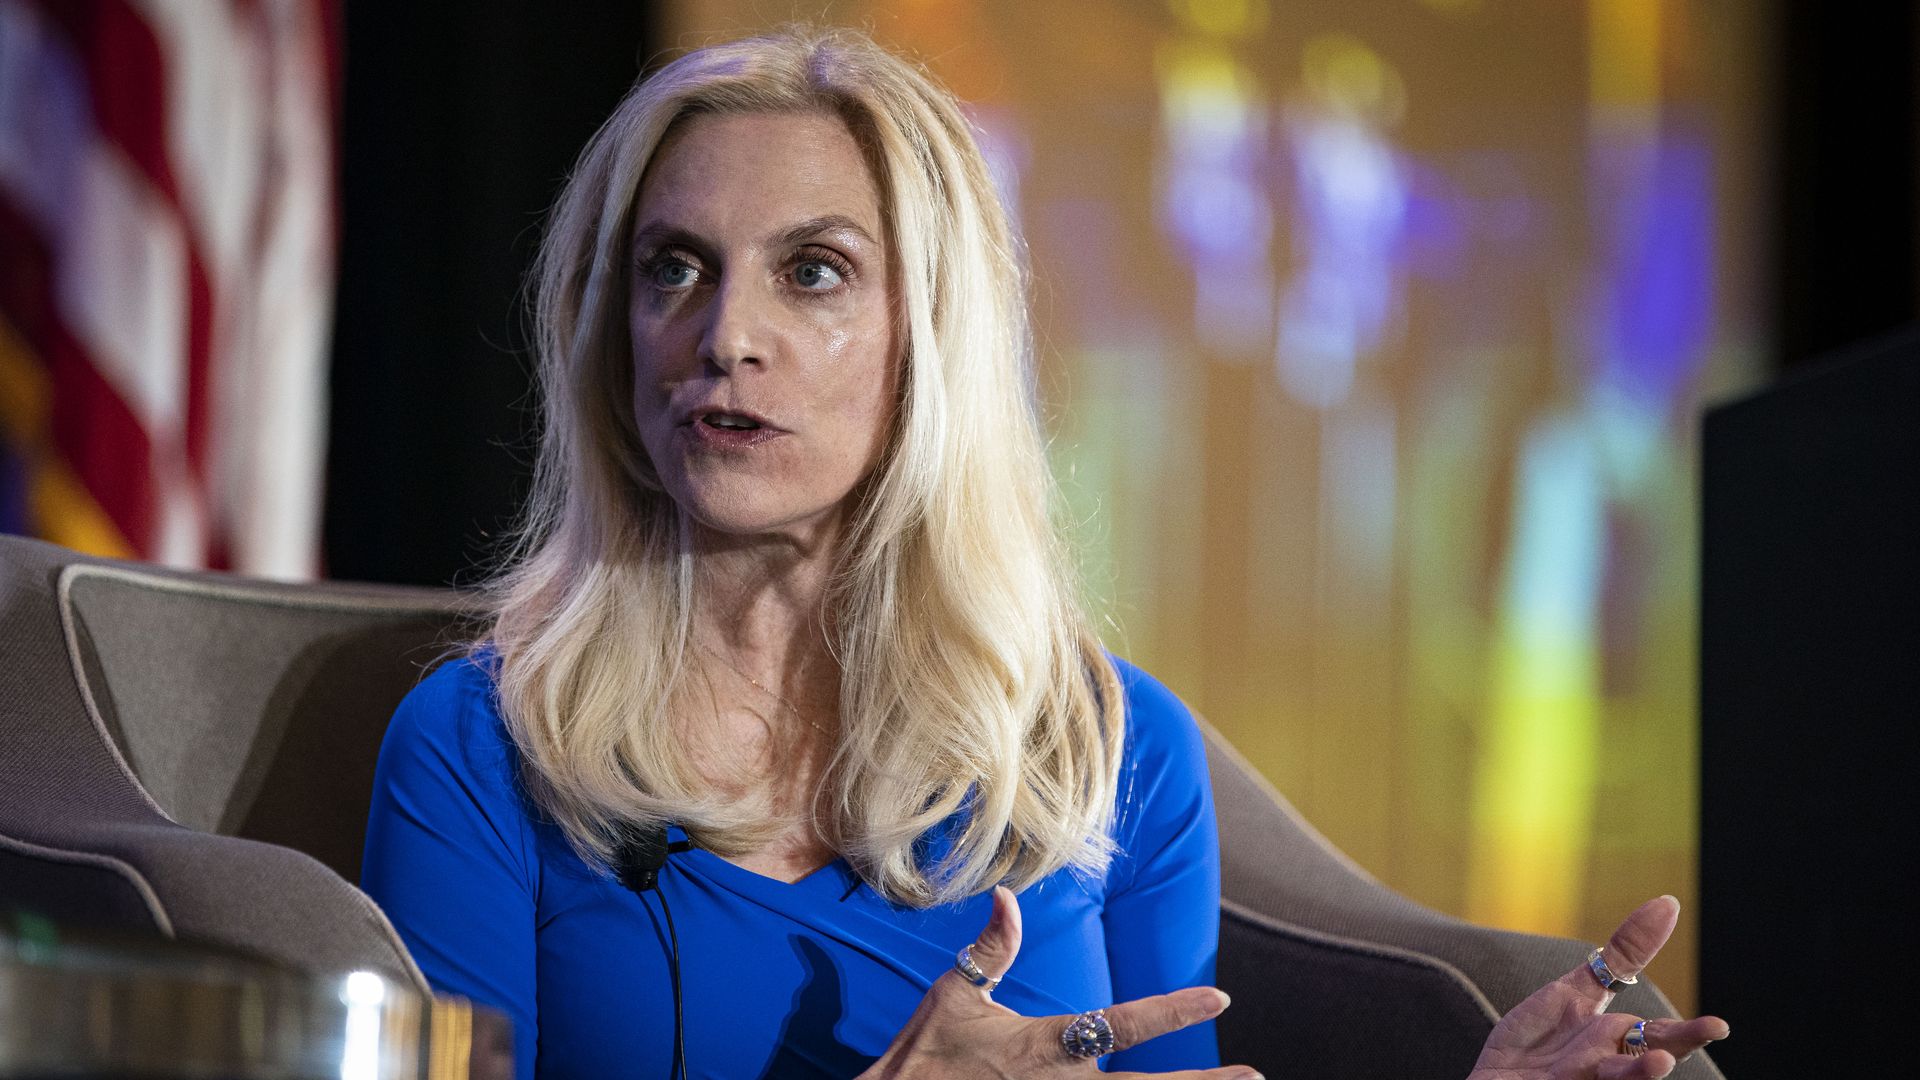 Lael Brainard speaks at a conference